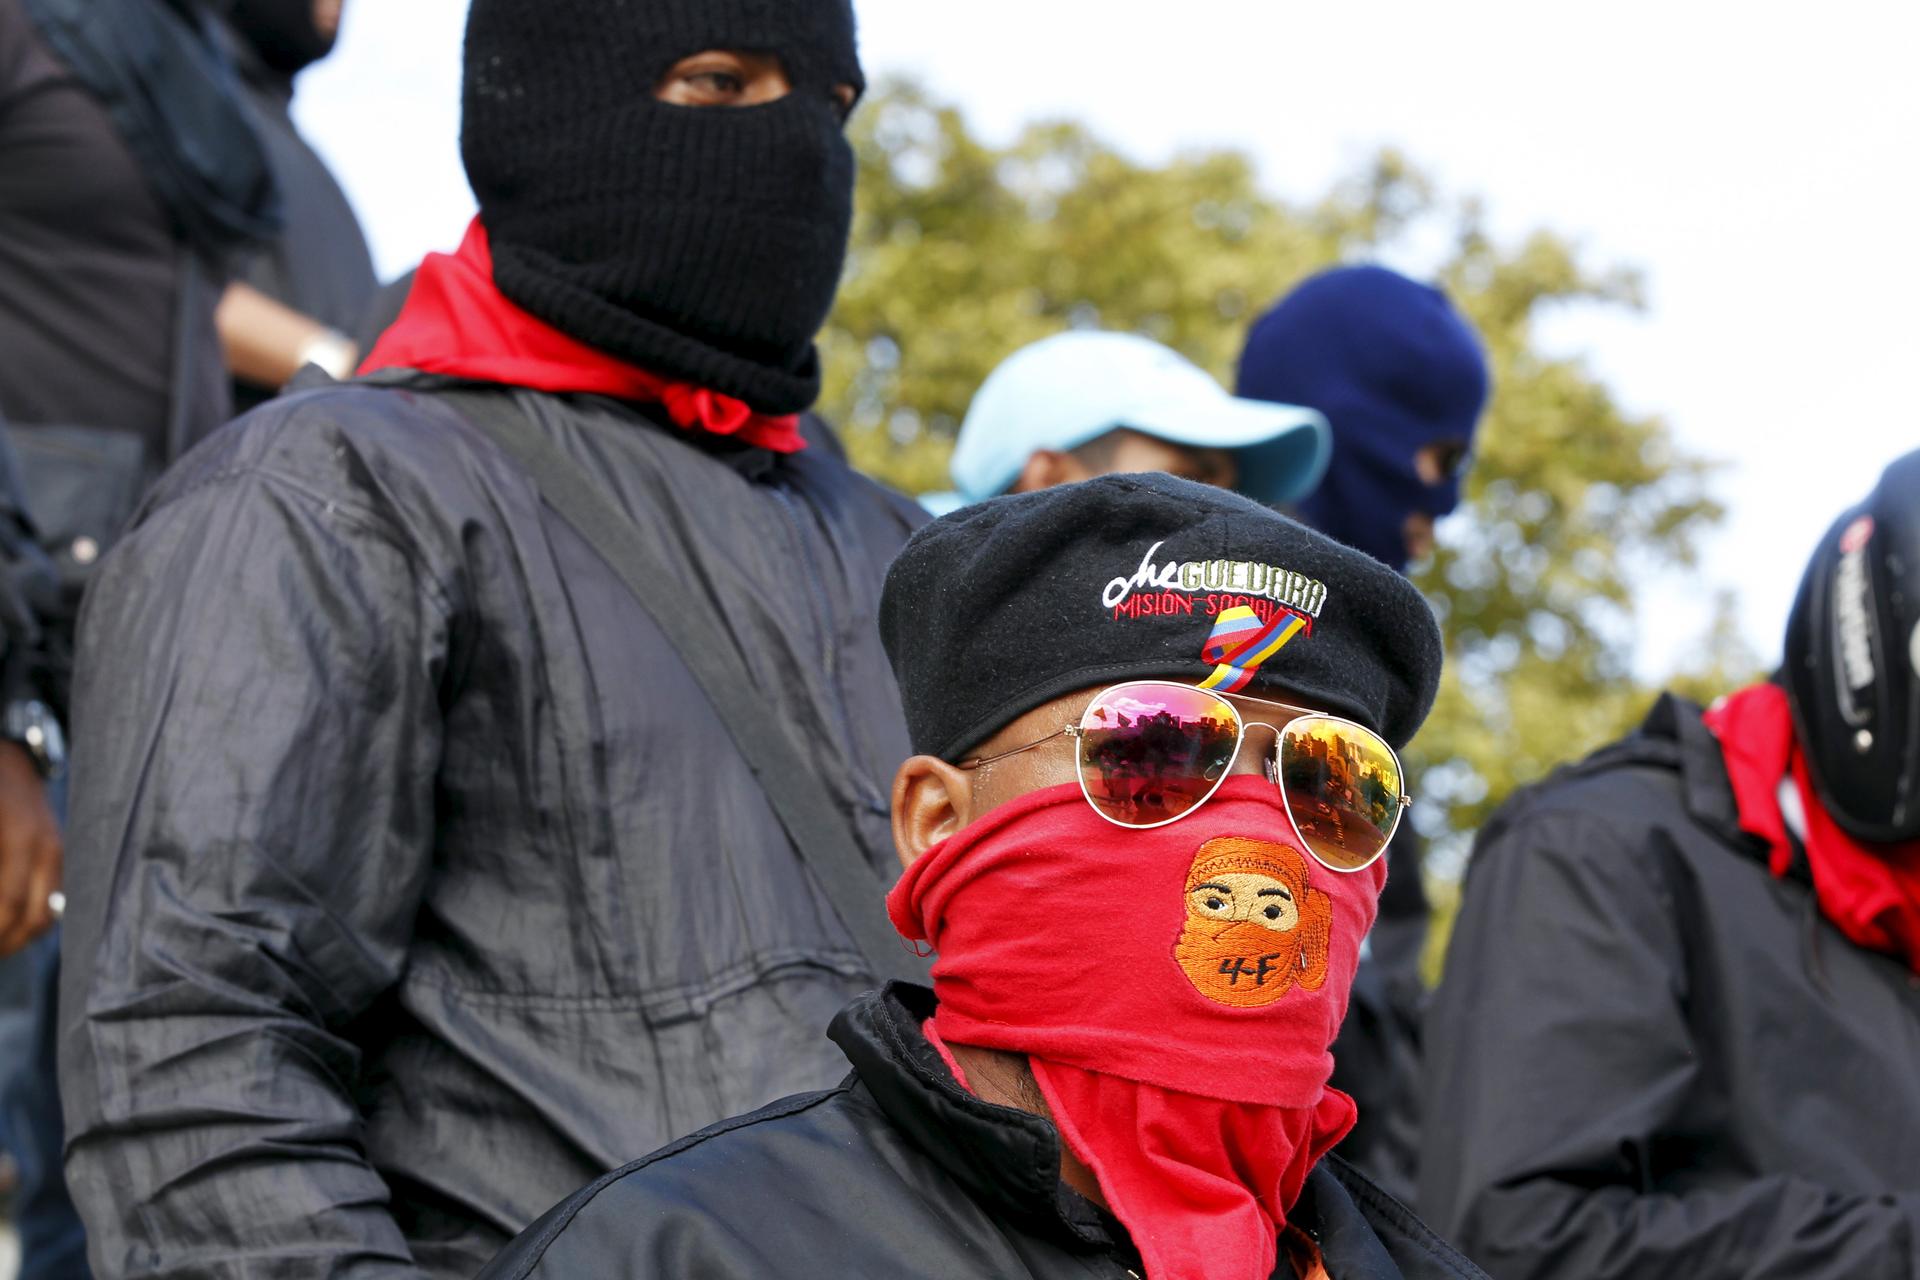 A man wears a red mask over his mouth and sunglasses